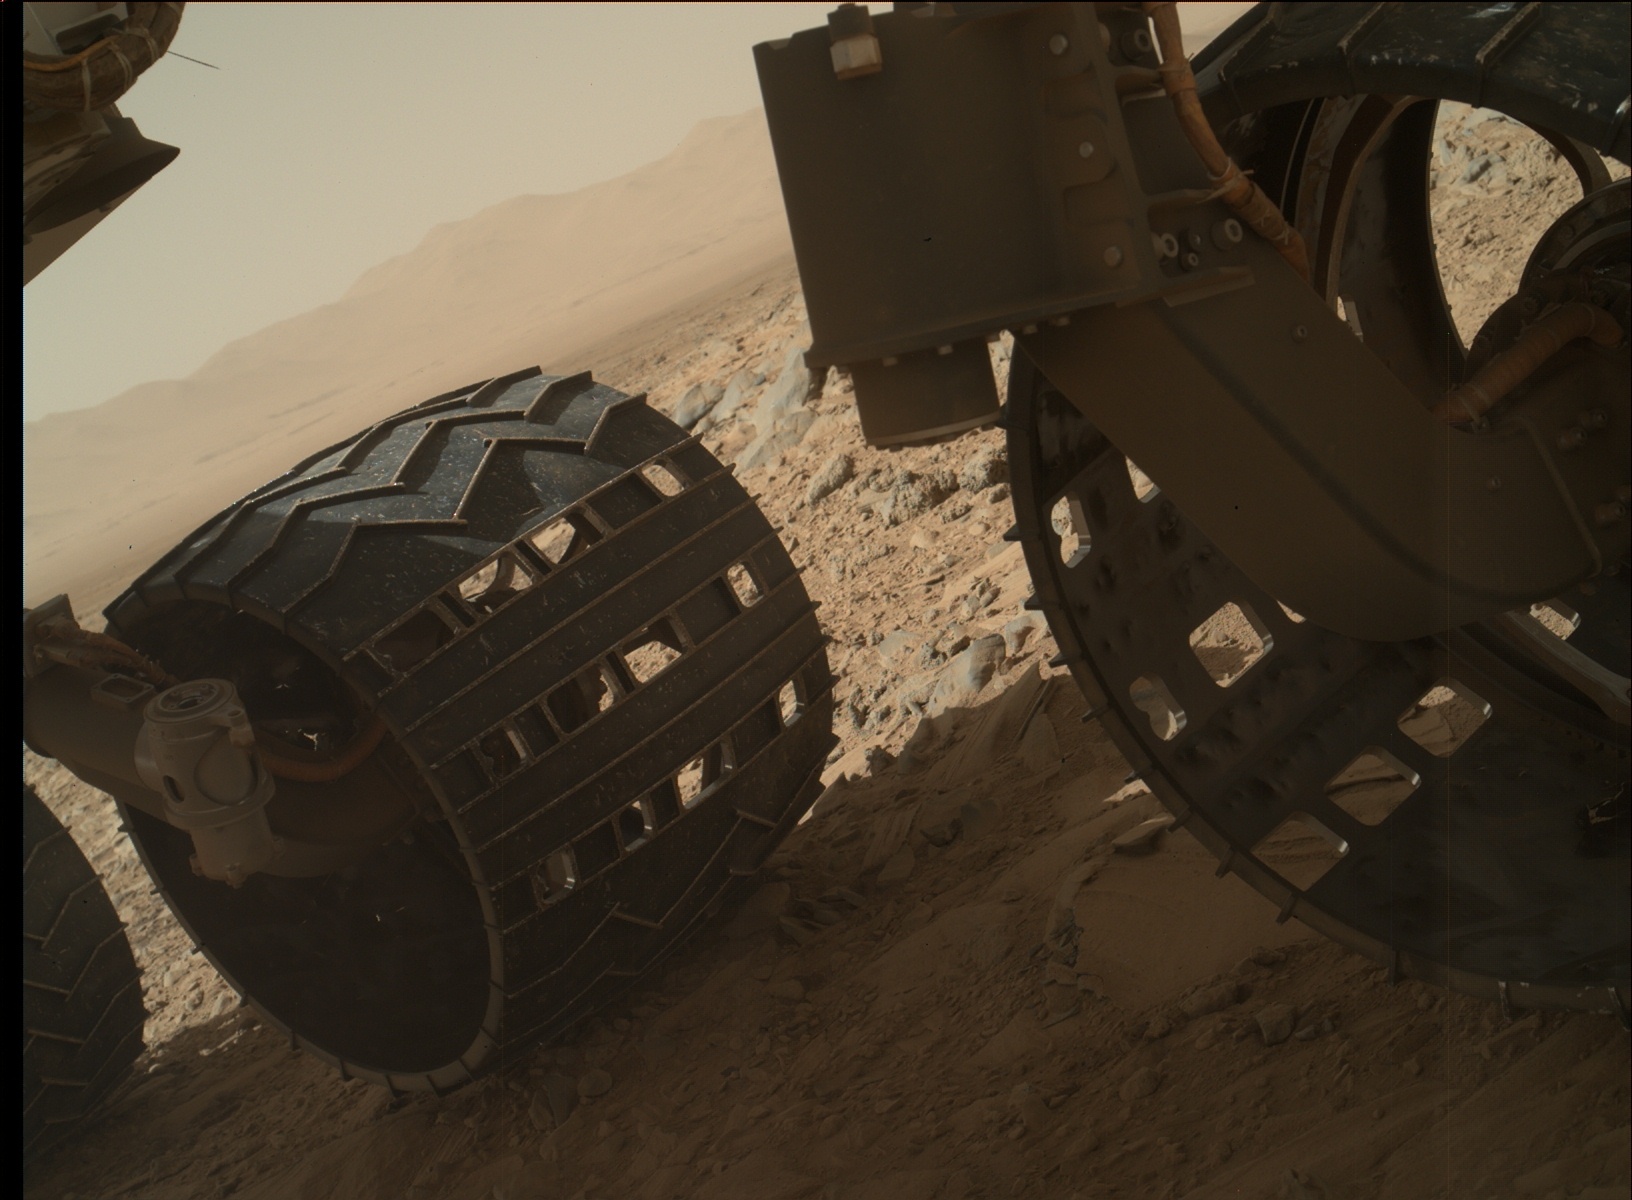 Nasa's Mars rover Curiosity acquired this image using its Mars Hand Lens Imager (MAHLI) on Sol 488